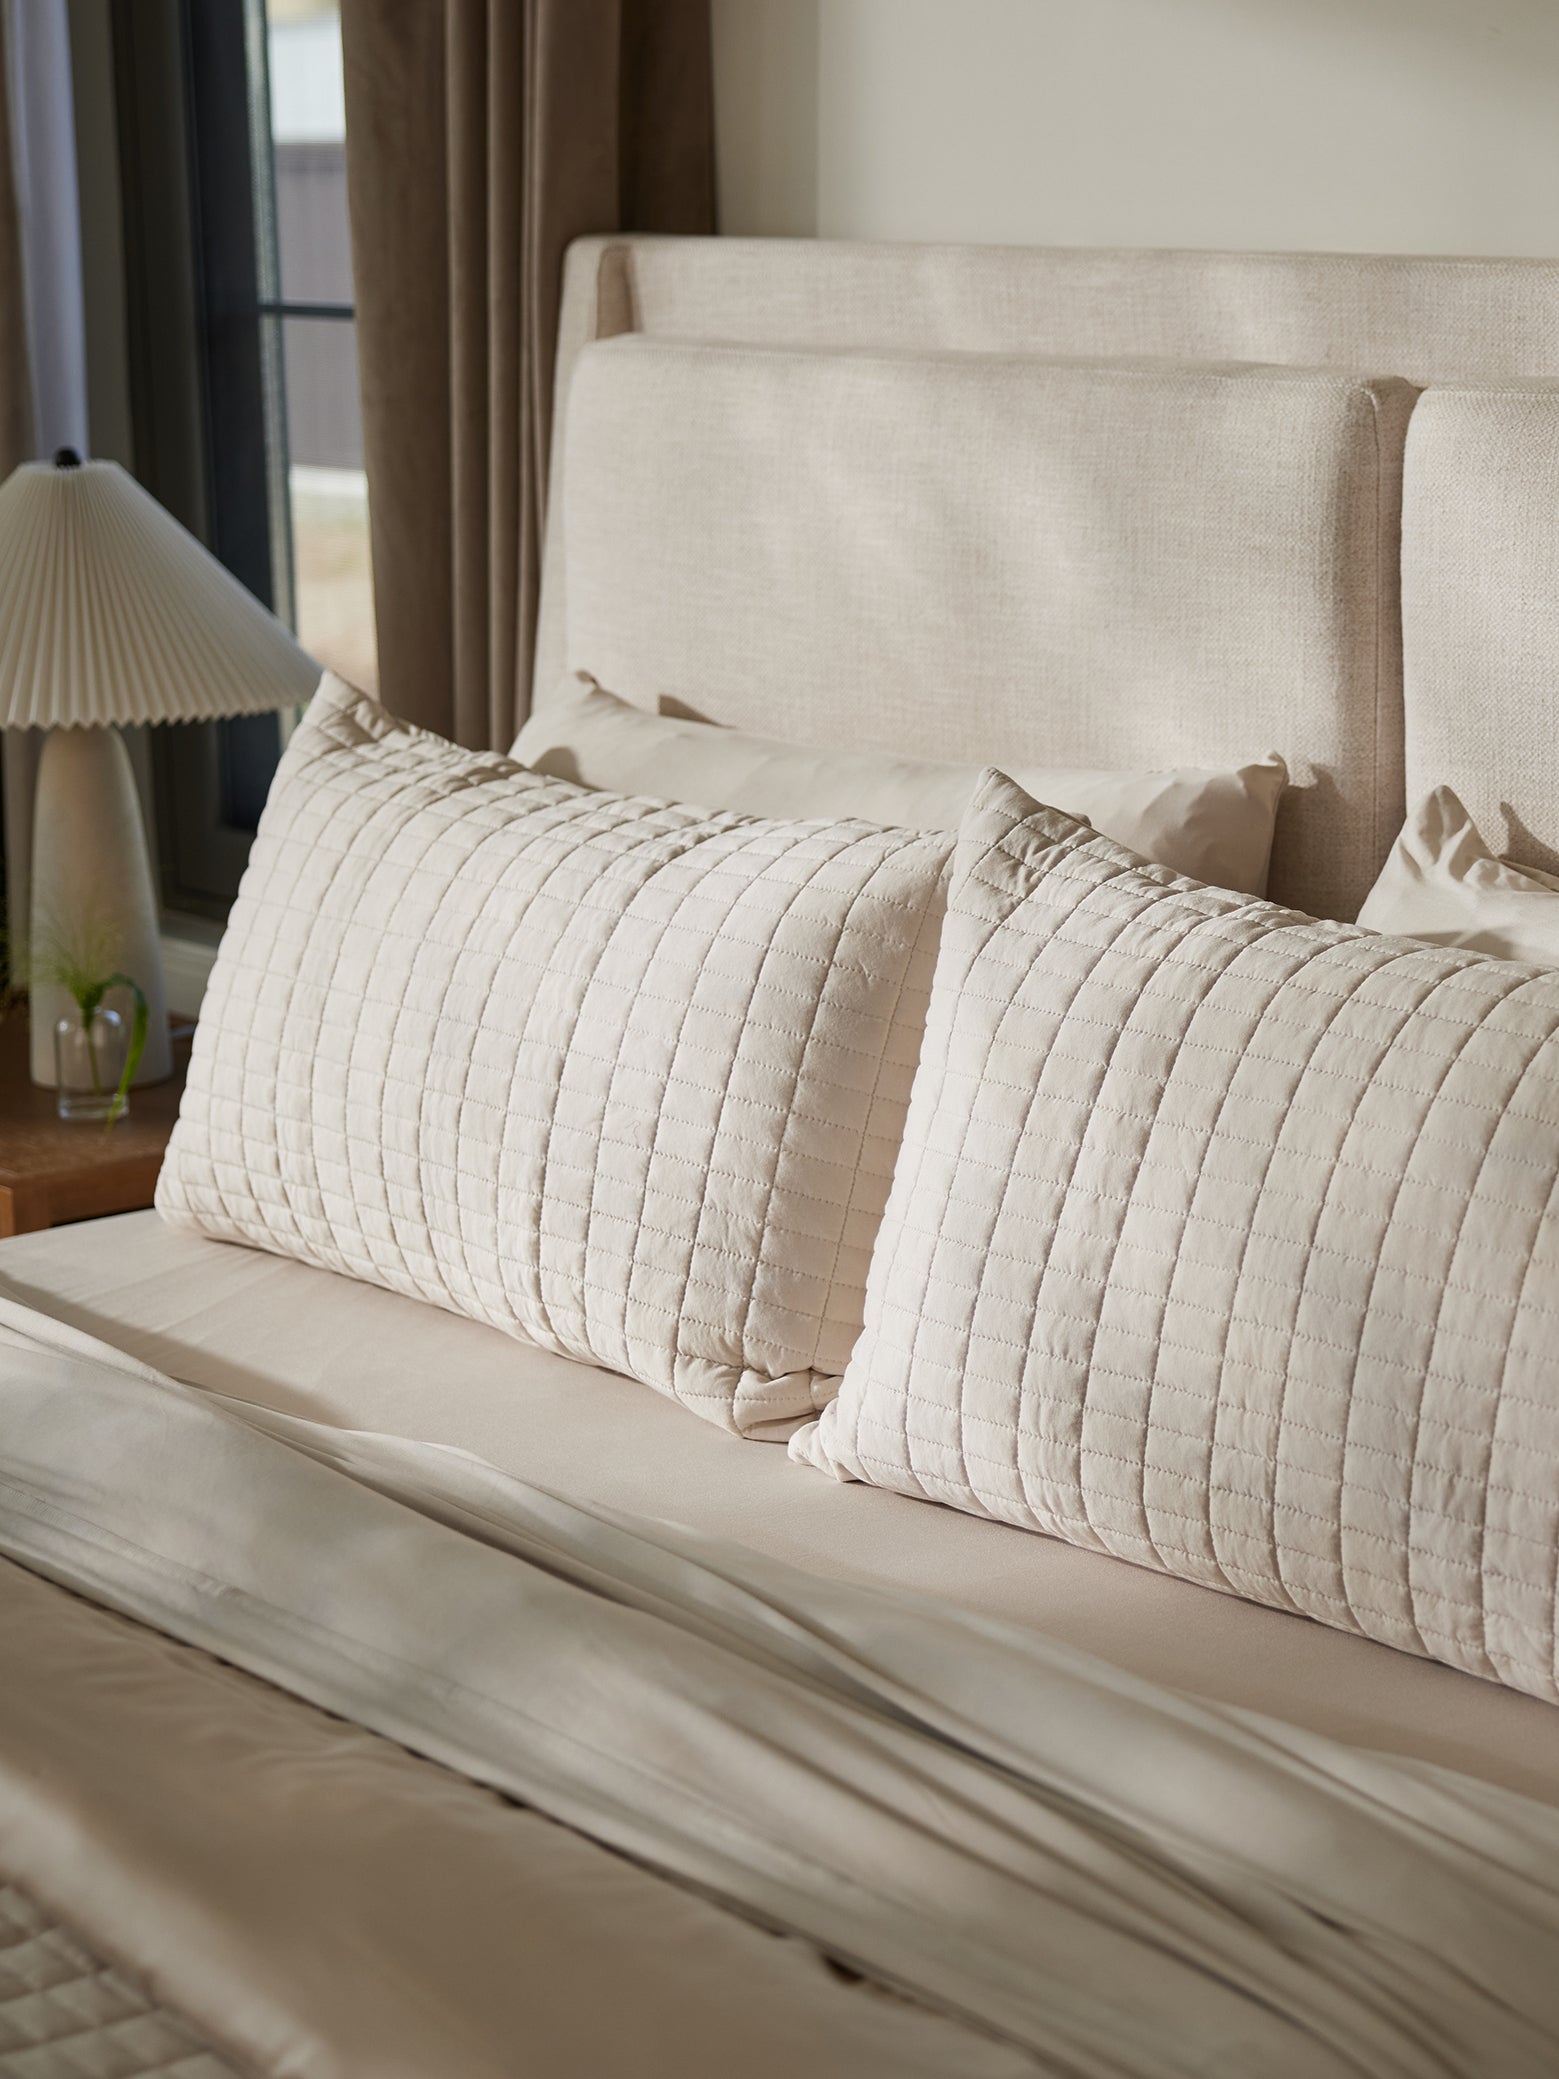 Pillows on bed with birch bamboo jersey shams 